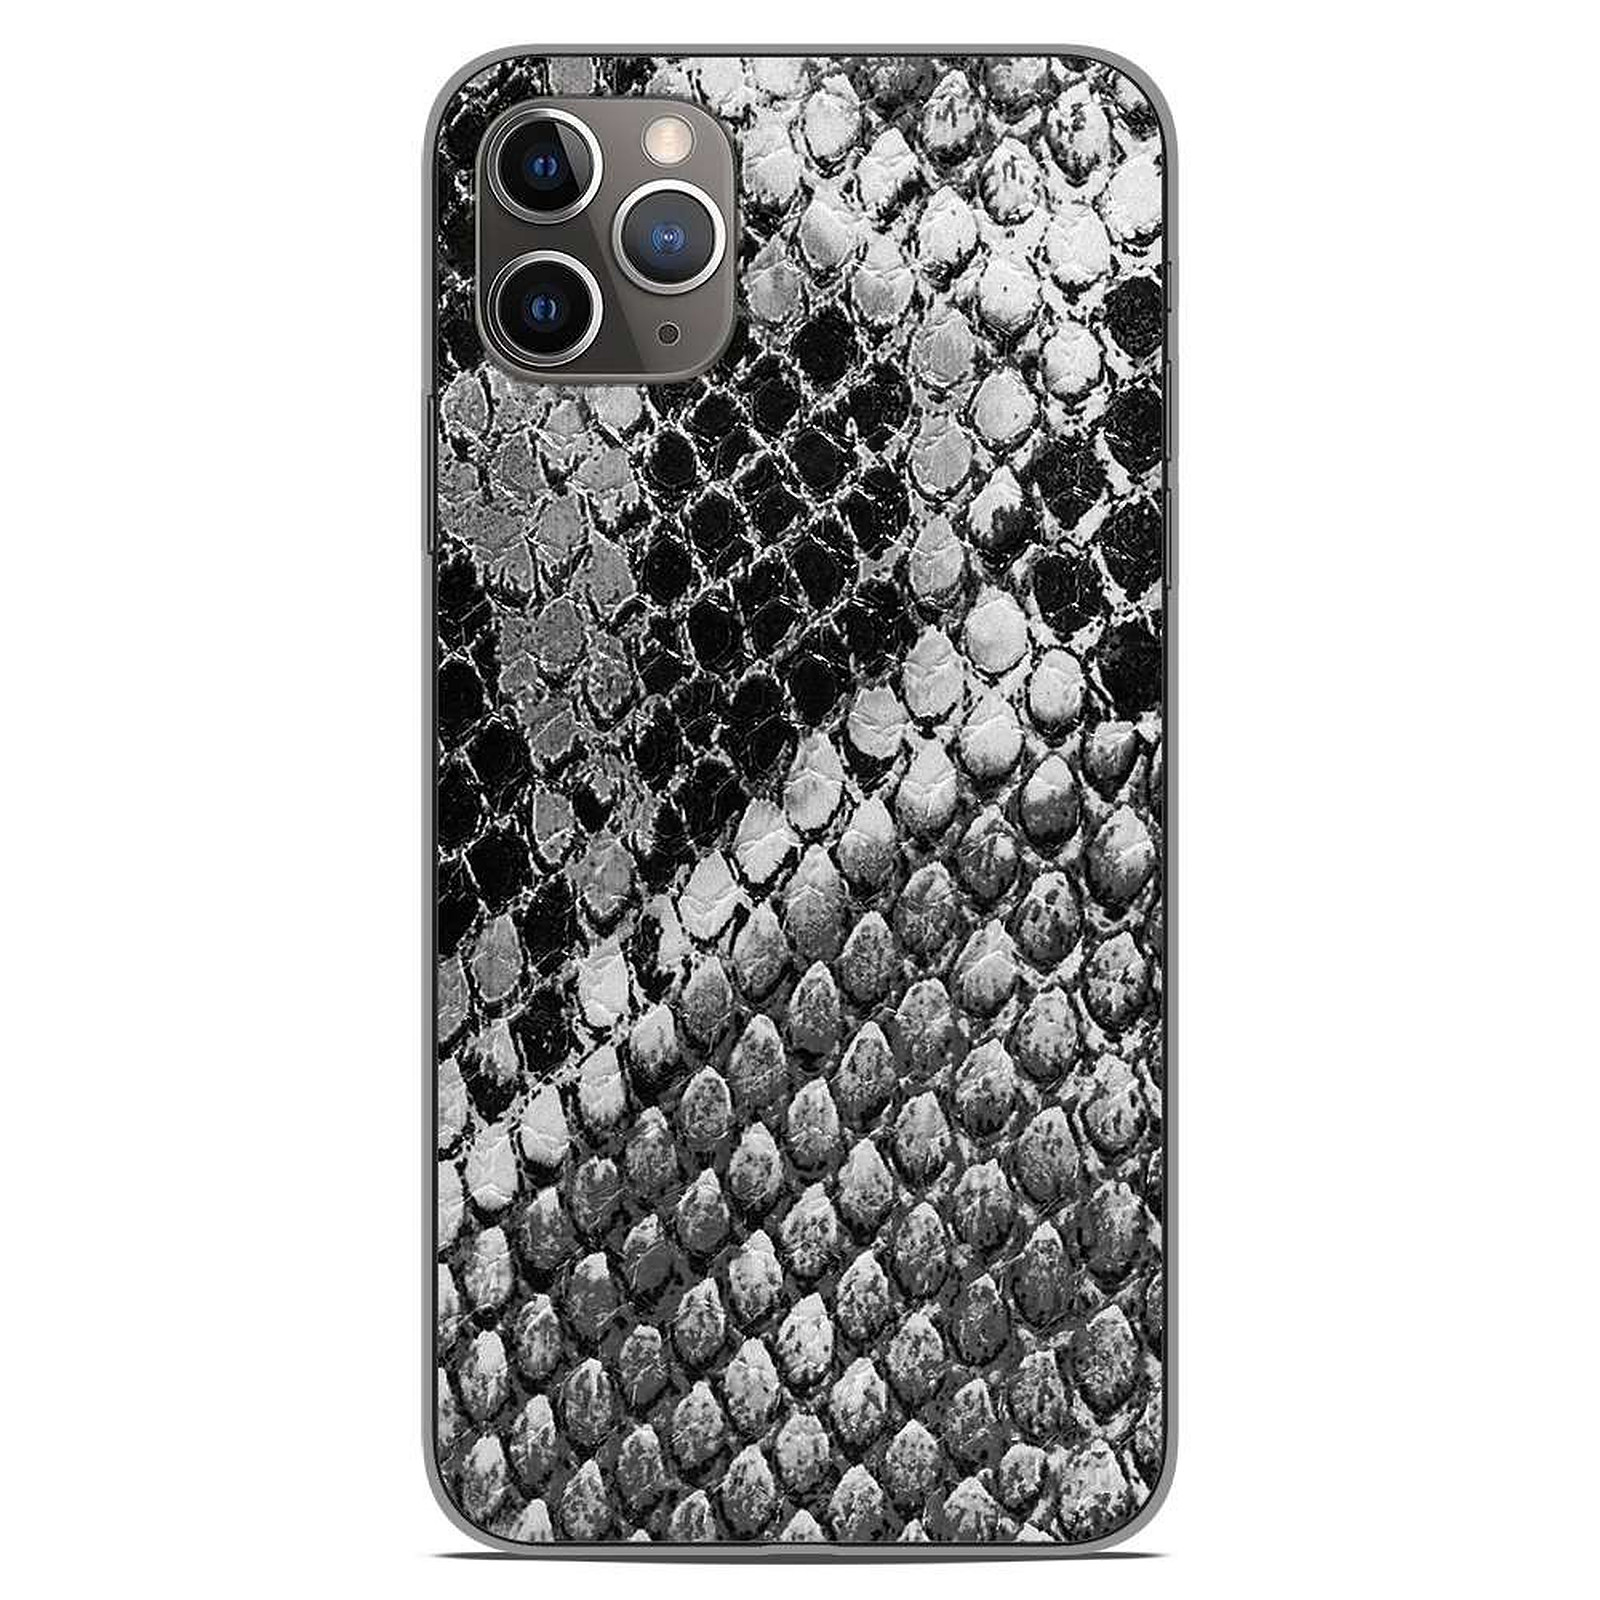 1001 Coques Coque silicone gel Apple iPhone 11 Pro Max motif Texture Python - Coque telephone 1001Coques